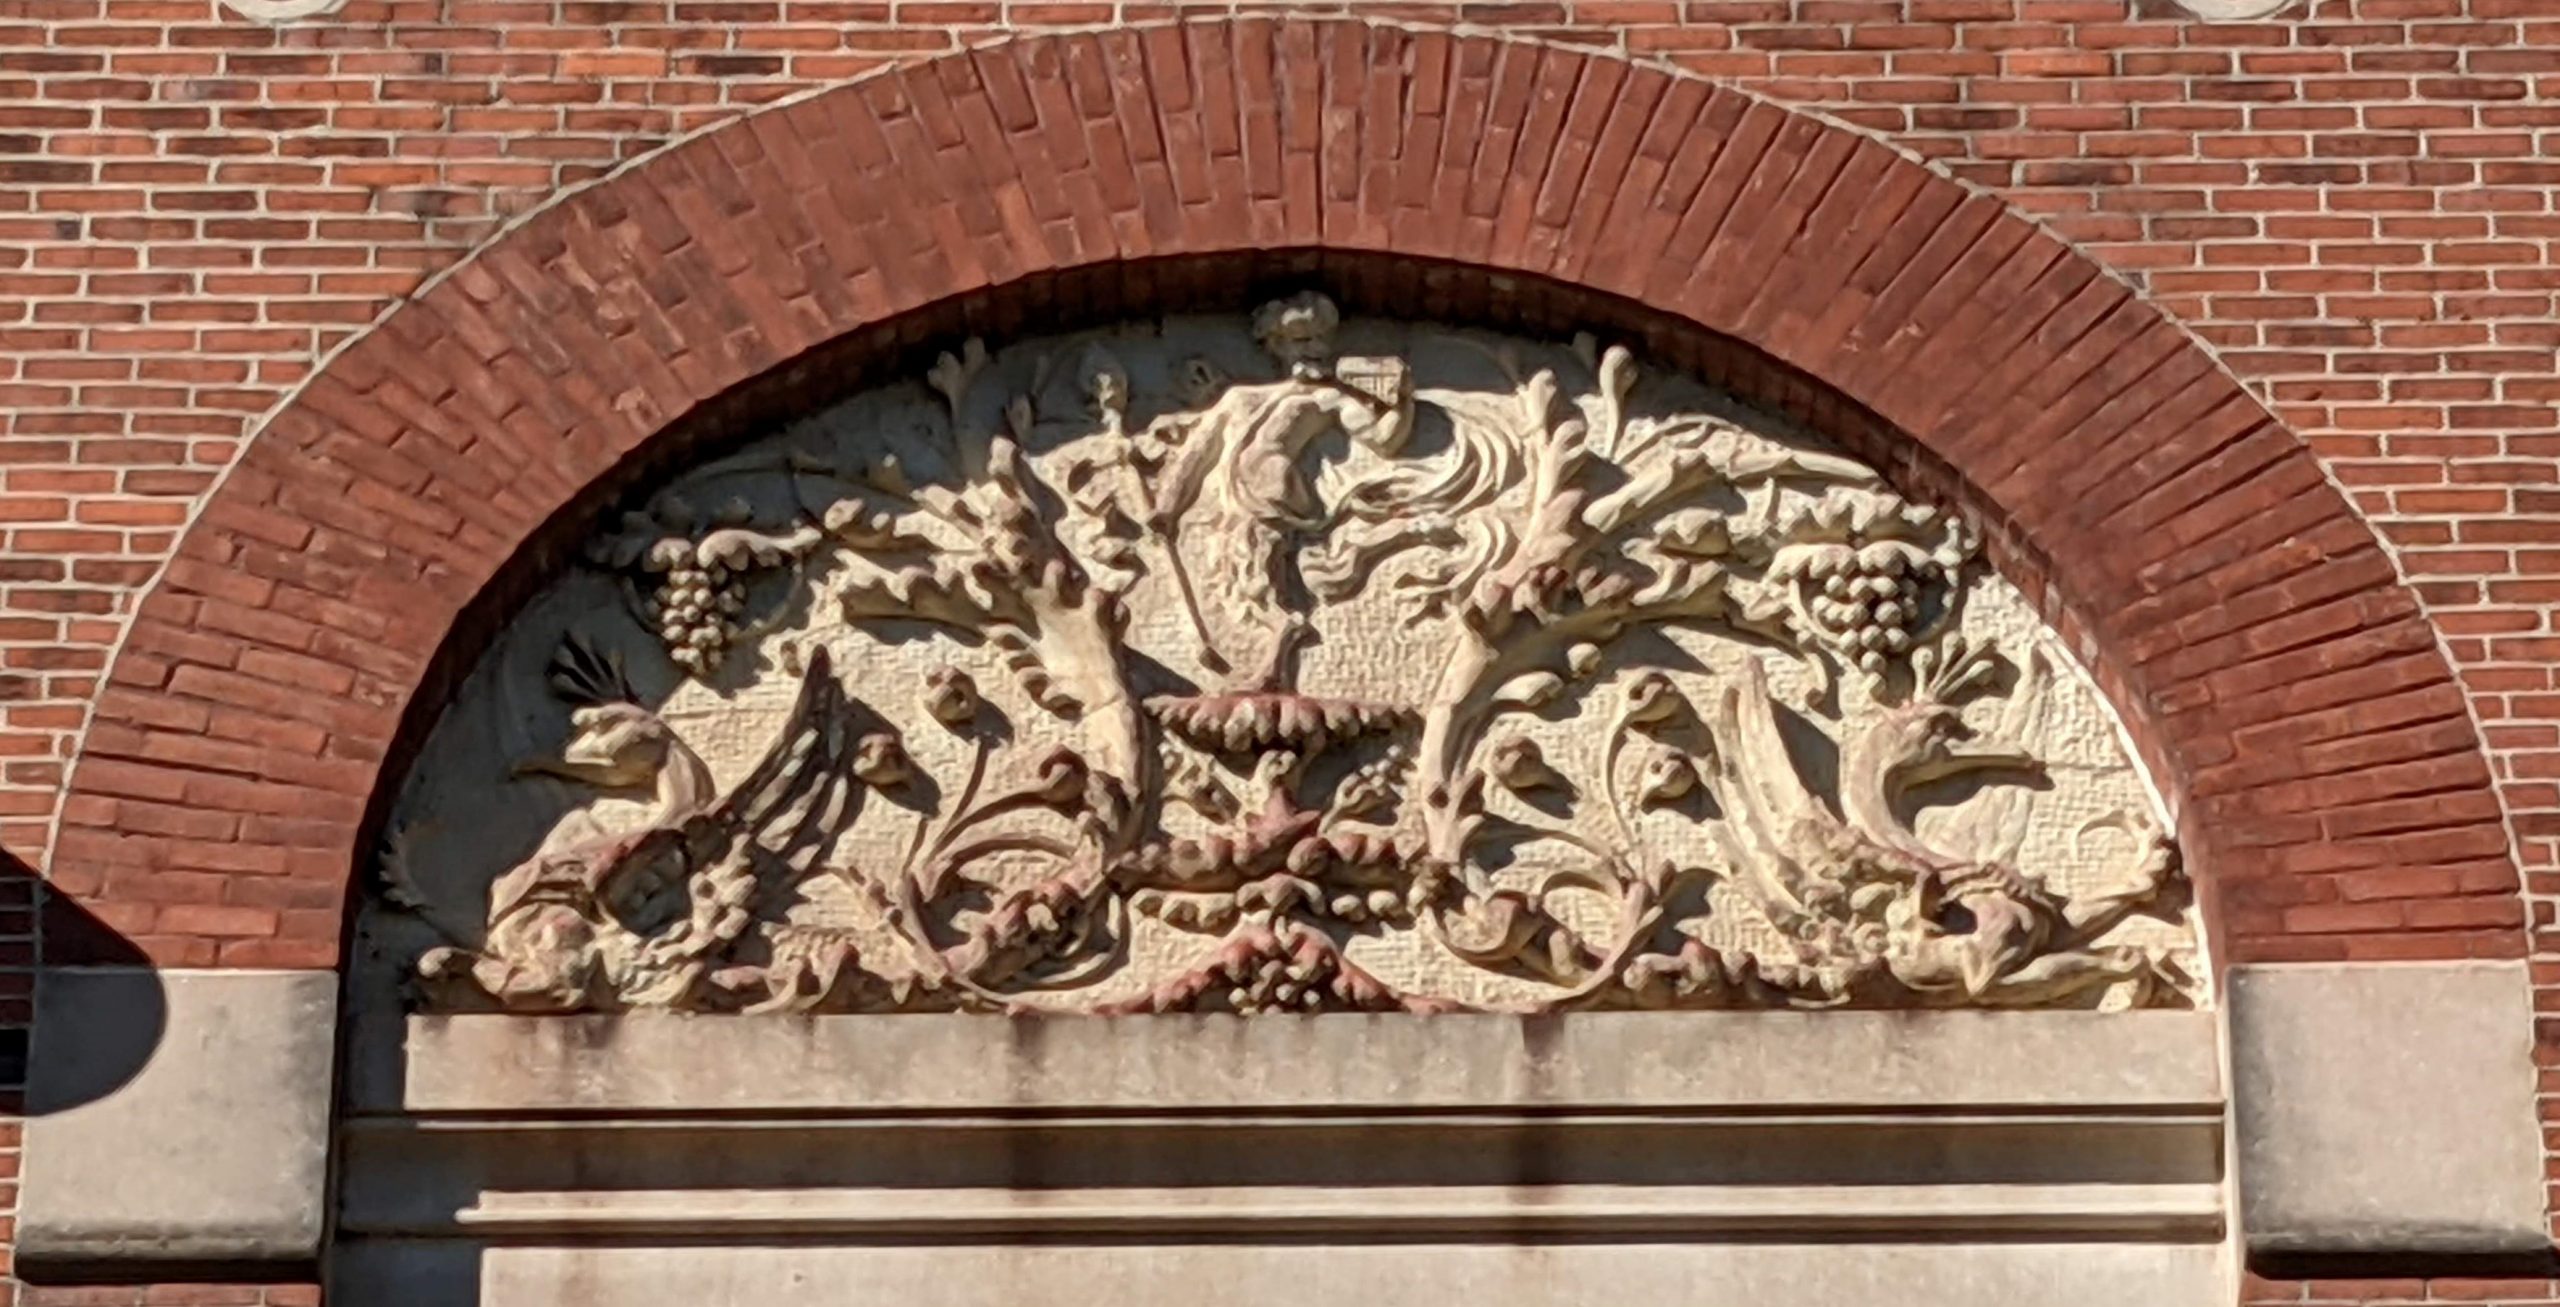 A carving of Bacchus among grapes and peacocks on the side of a building.